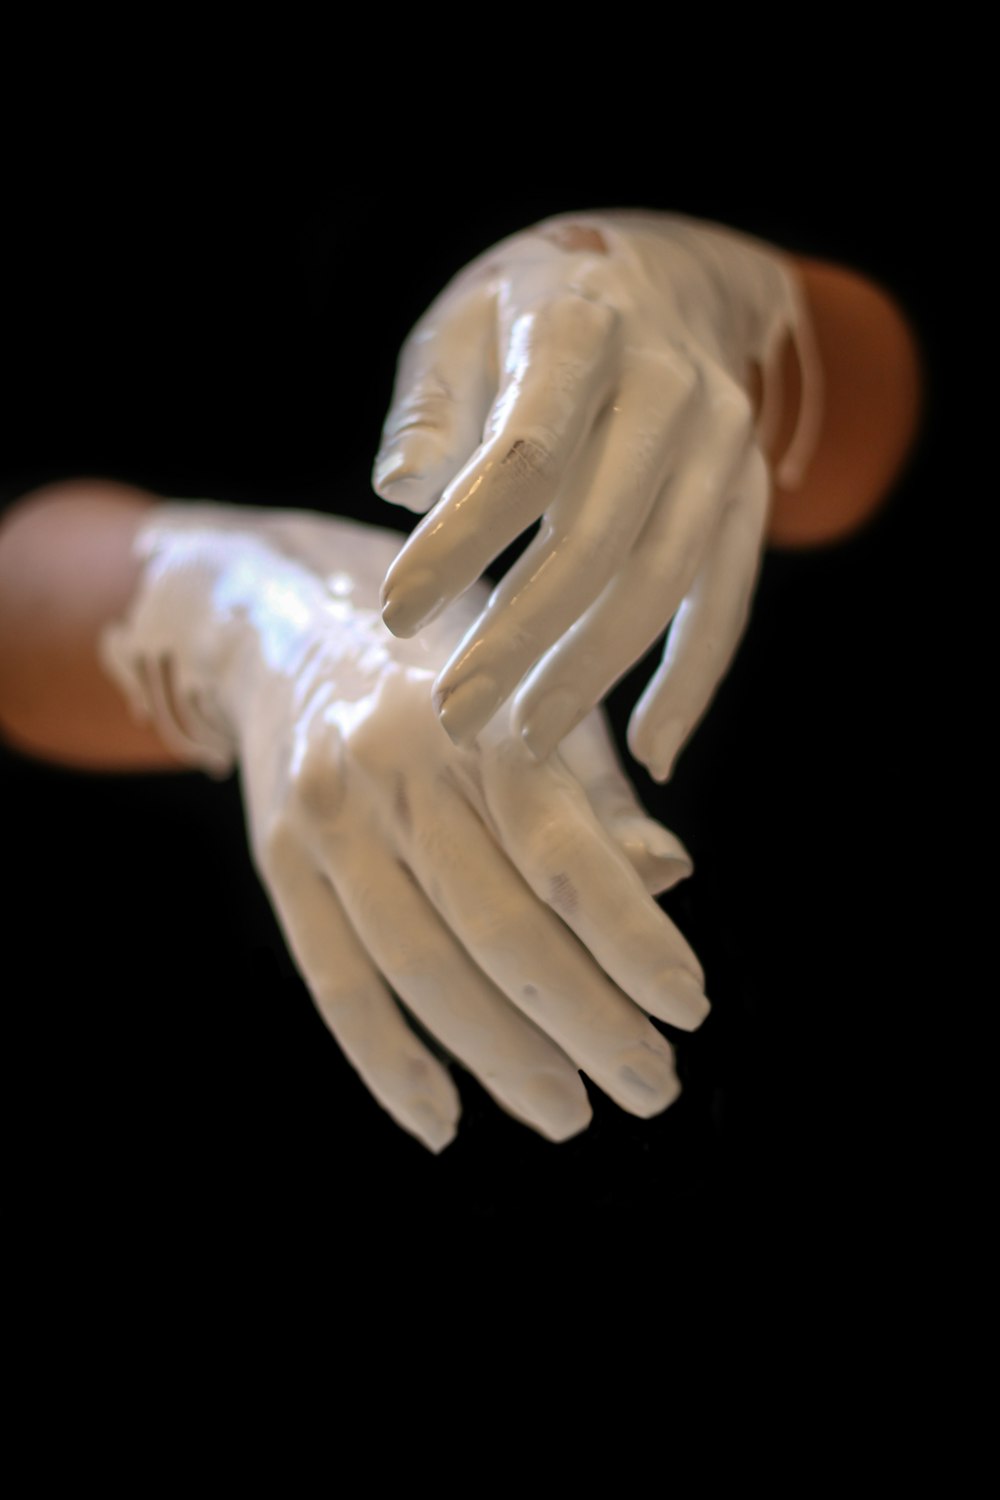 person's hands with white paint